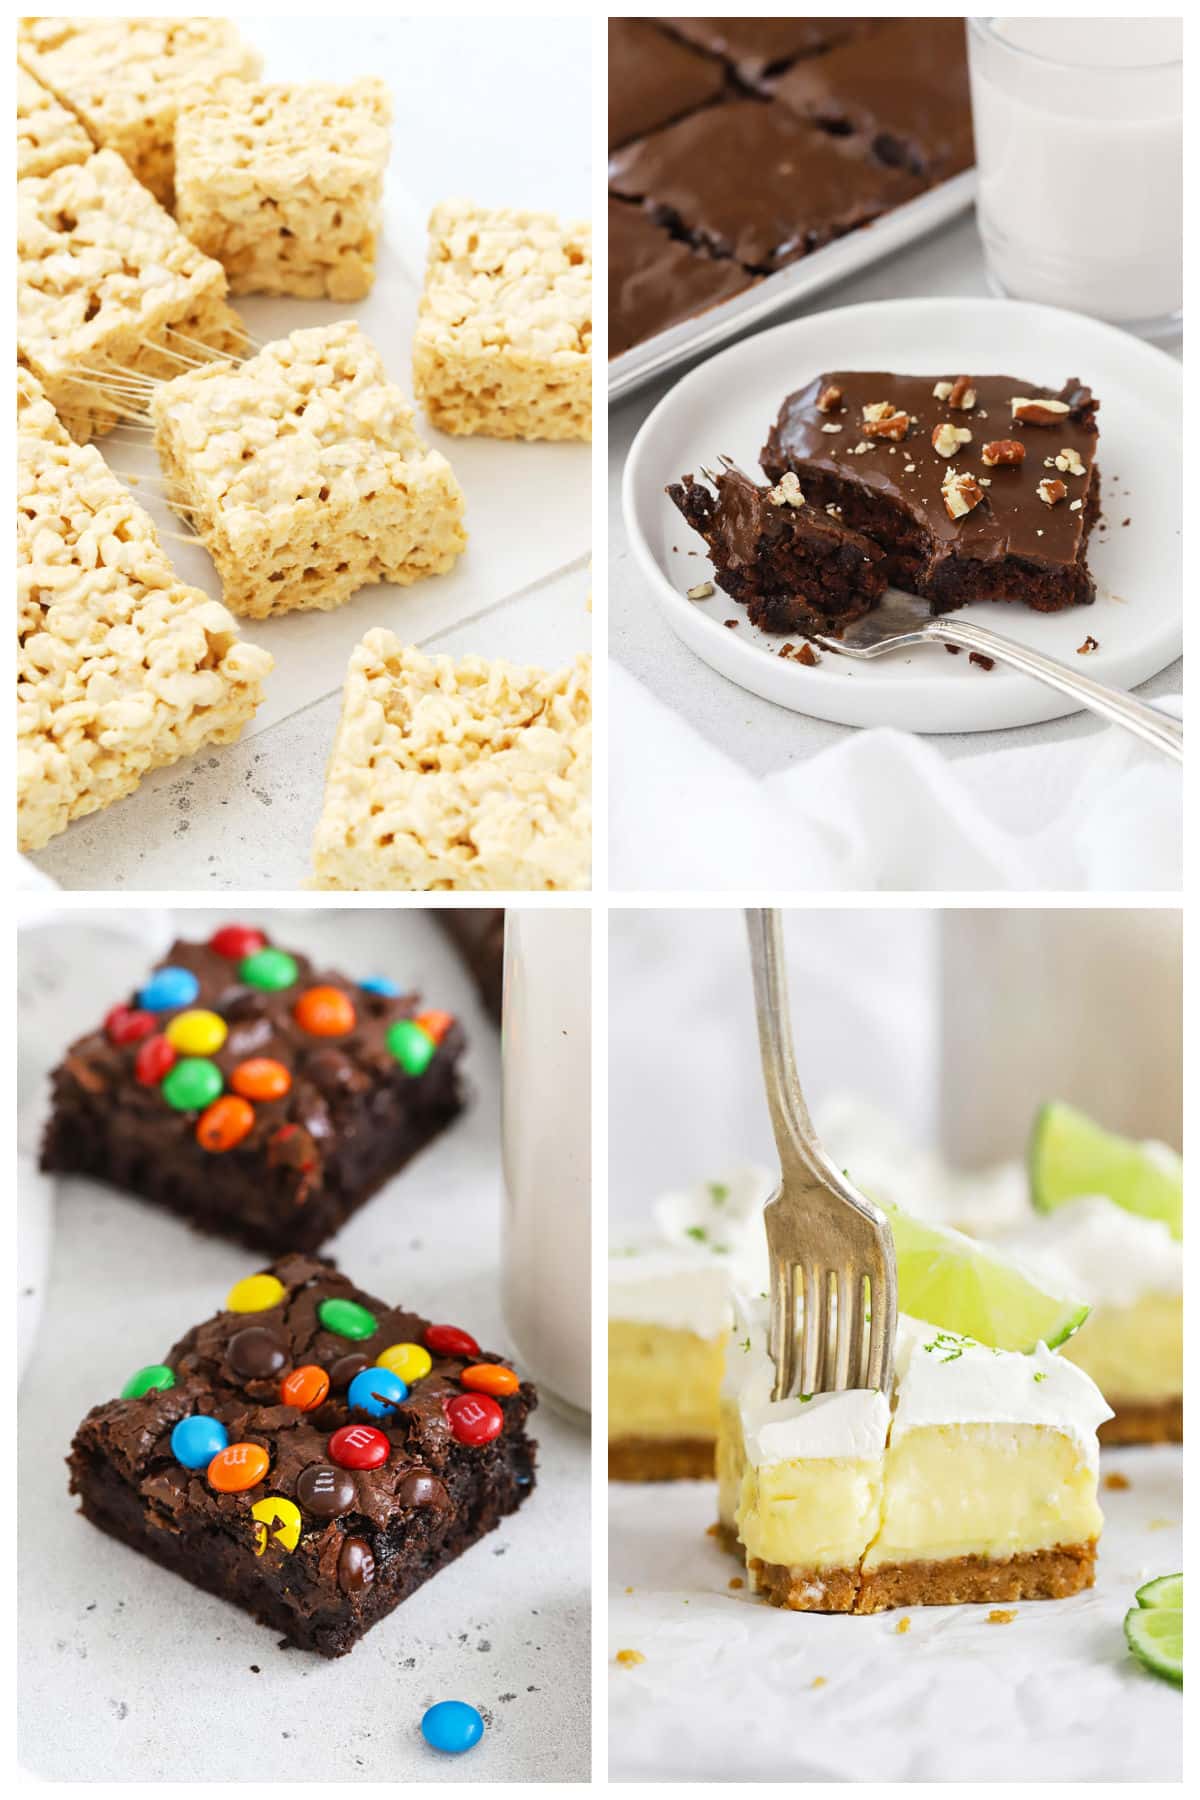 collage of gluten-free 4th of july desserts